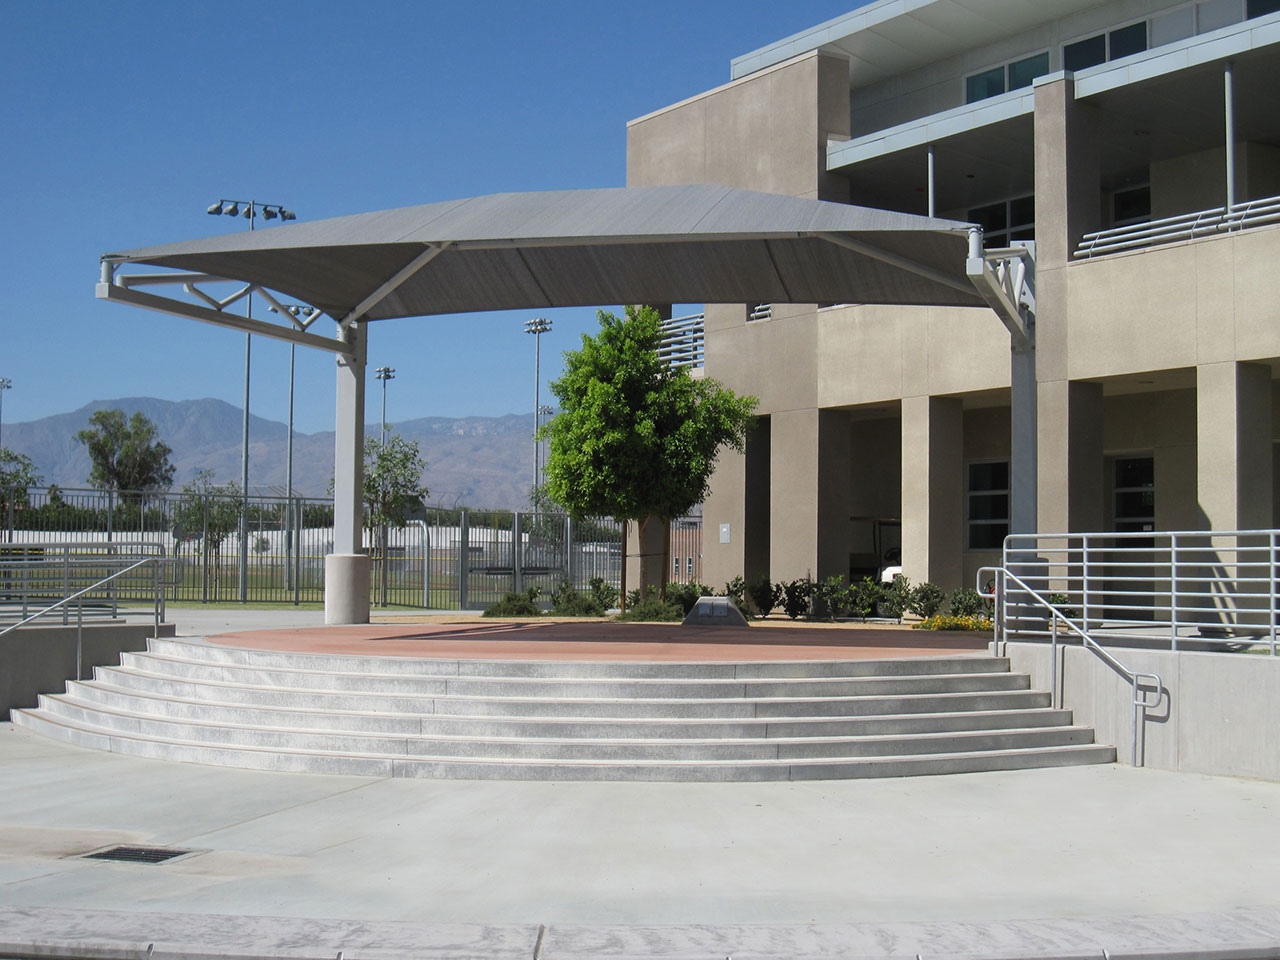 usa shade structure outside of school building